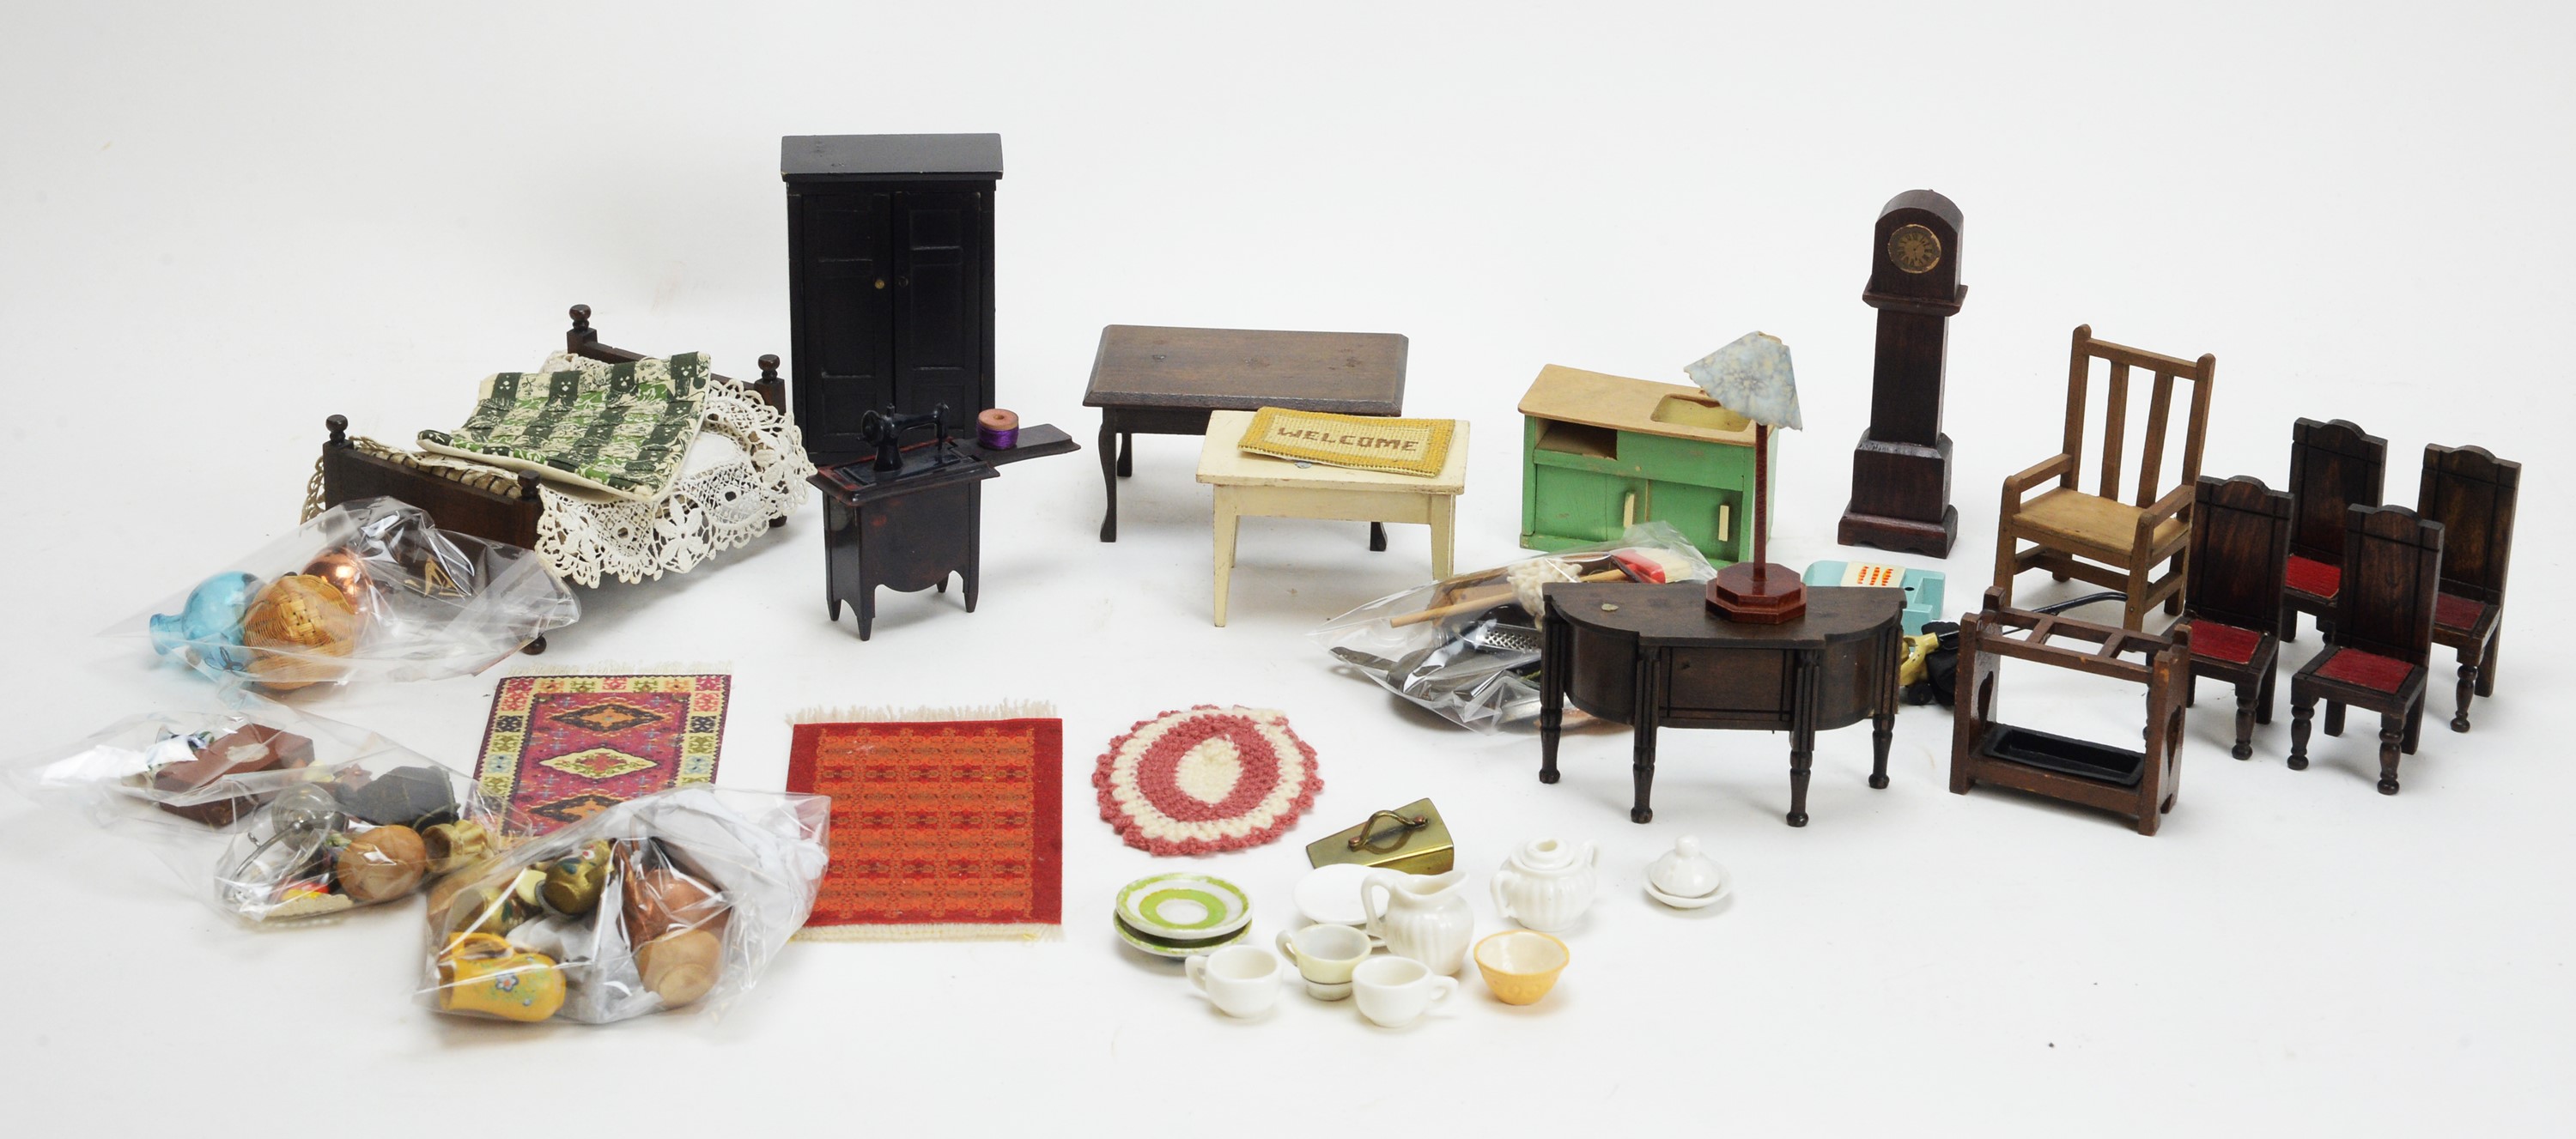 A collection of miniature dolls, furniture and other items.